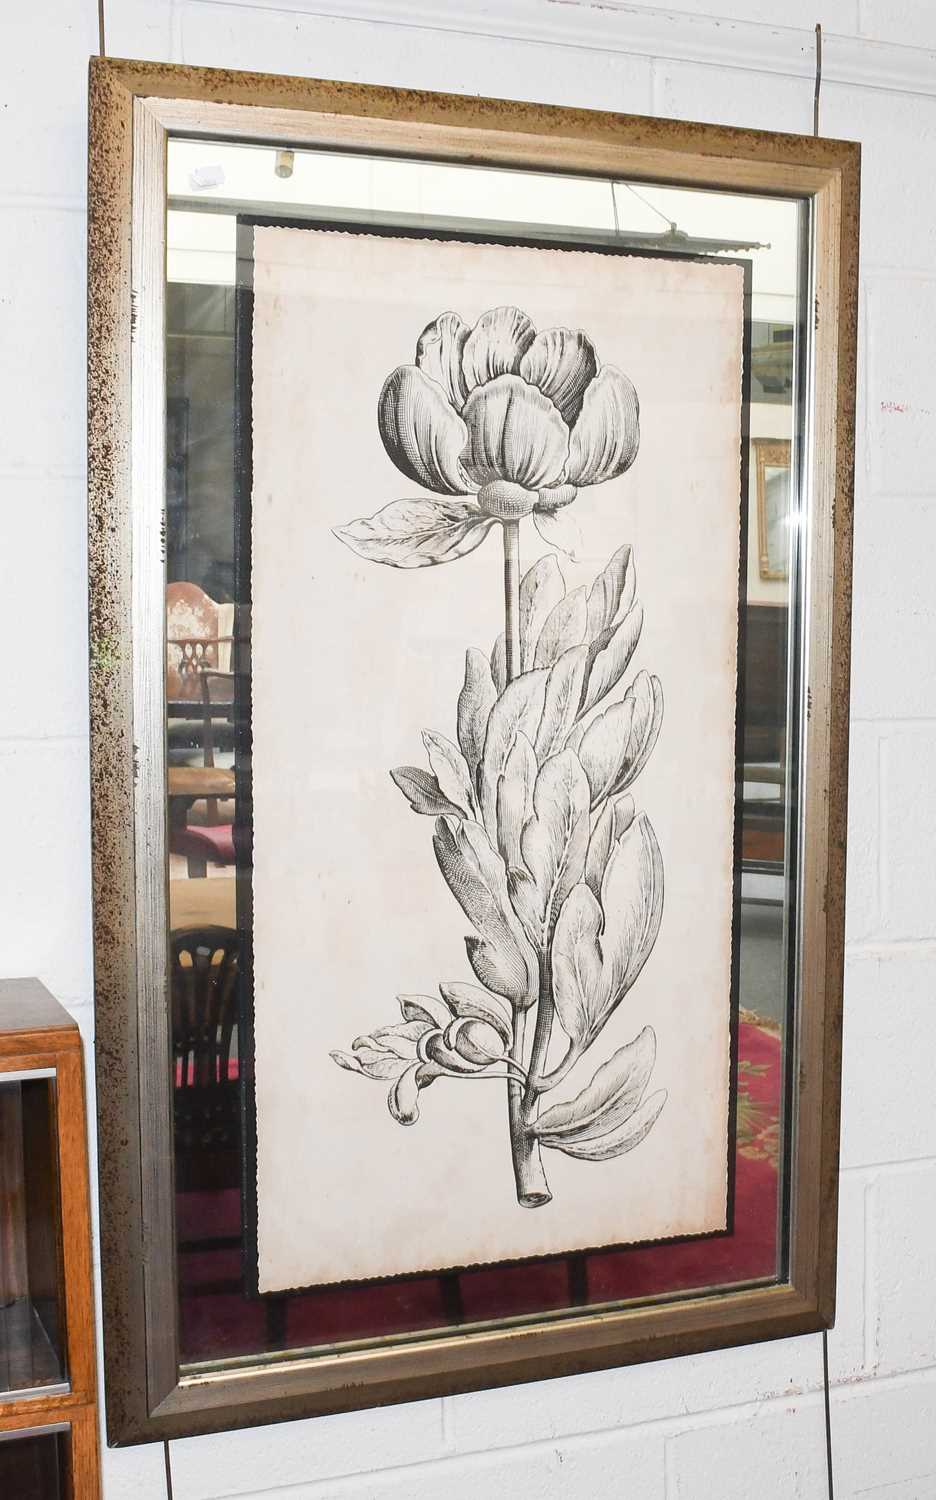 Set of Four Decorative John-Richard Botanical Prints in Mirrored Frames, 91cm by 45.5cm (4) - Image 3 of 5